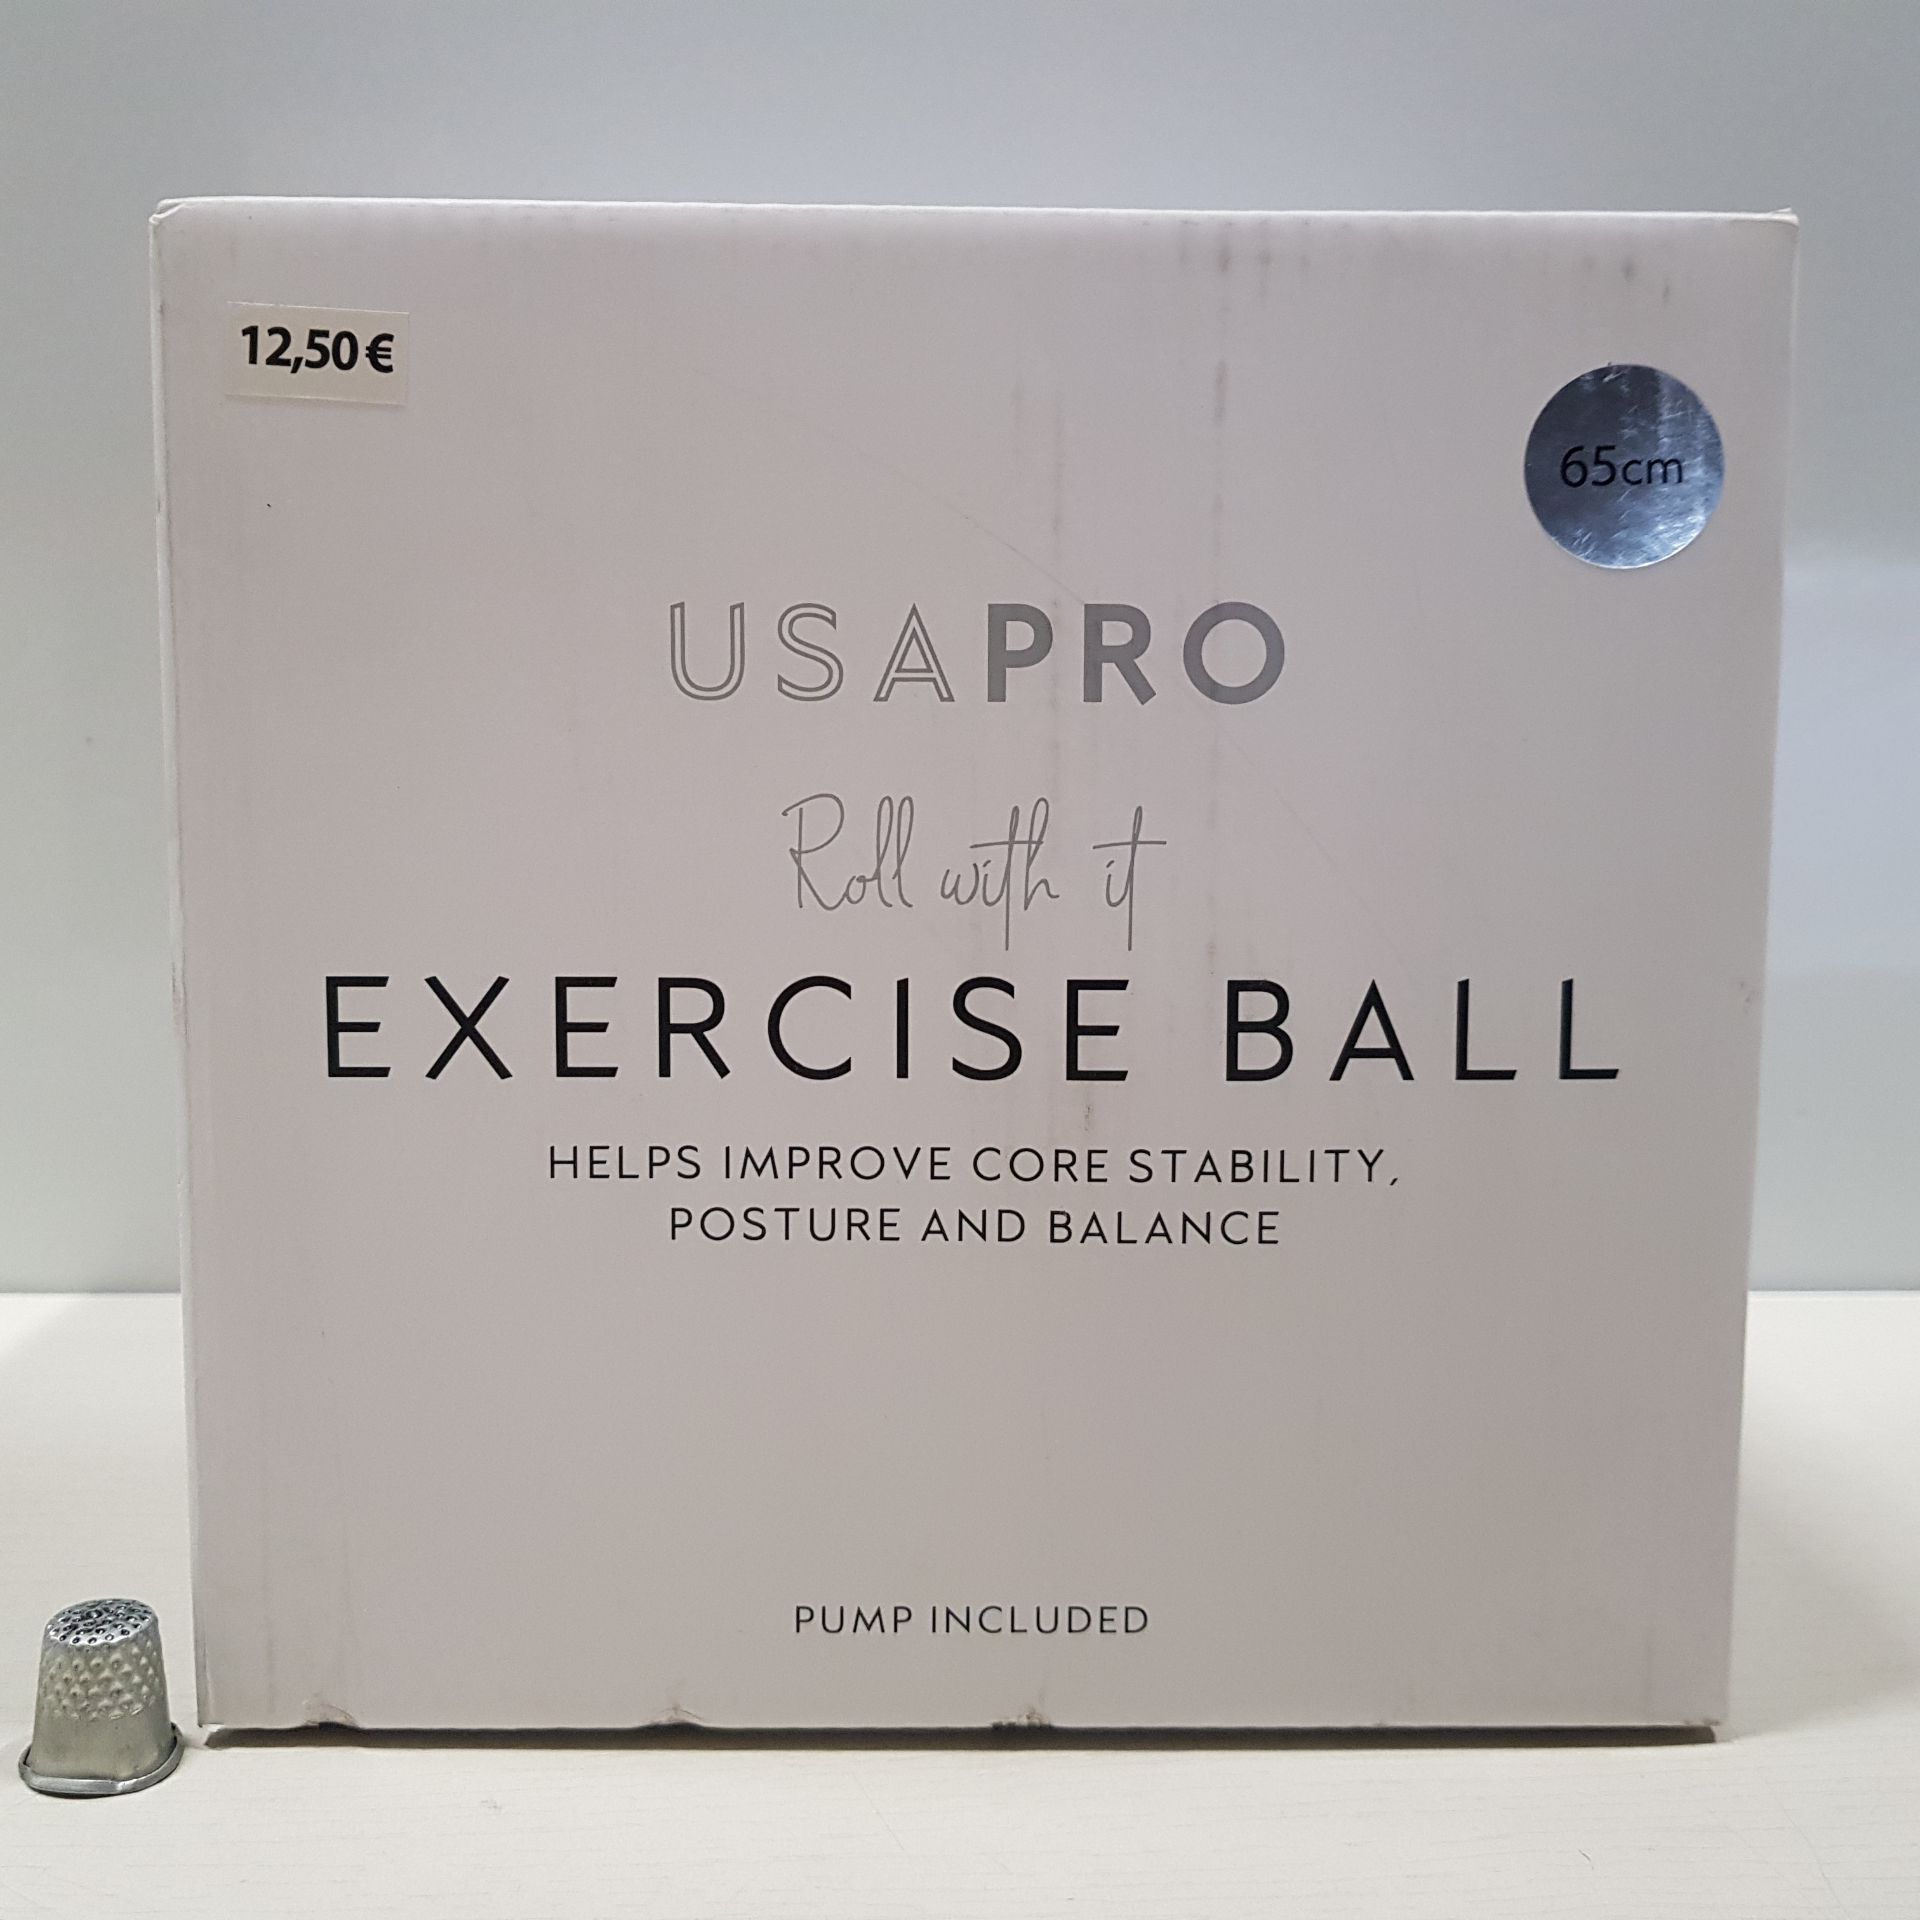 48 X BRAND NEW USA PRO EXERCISE BALL SIZE 65CM WITH PUMP INCLUDED - IN 4 BOXES